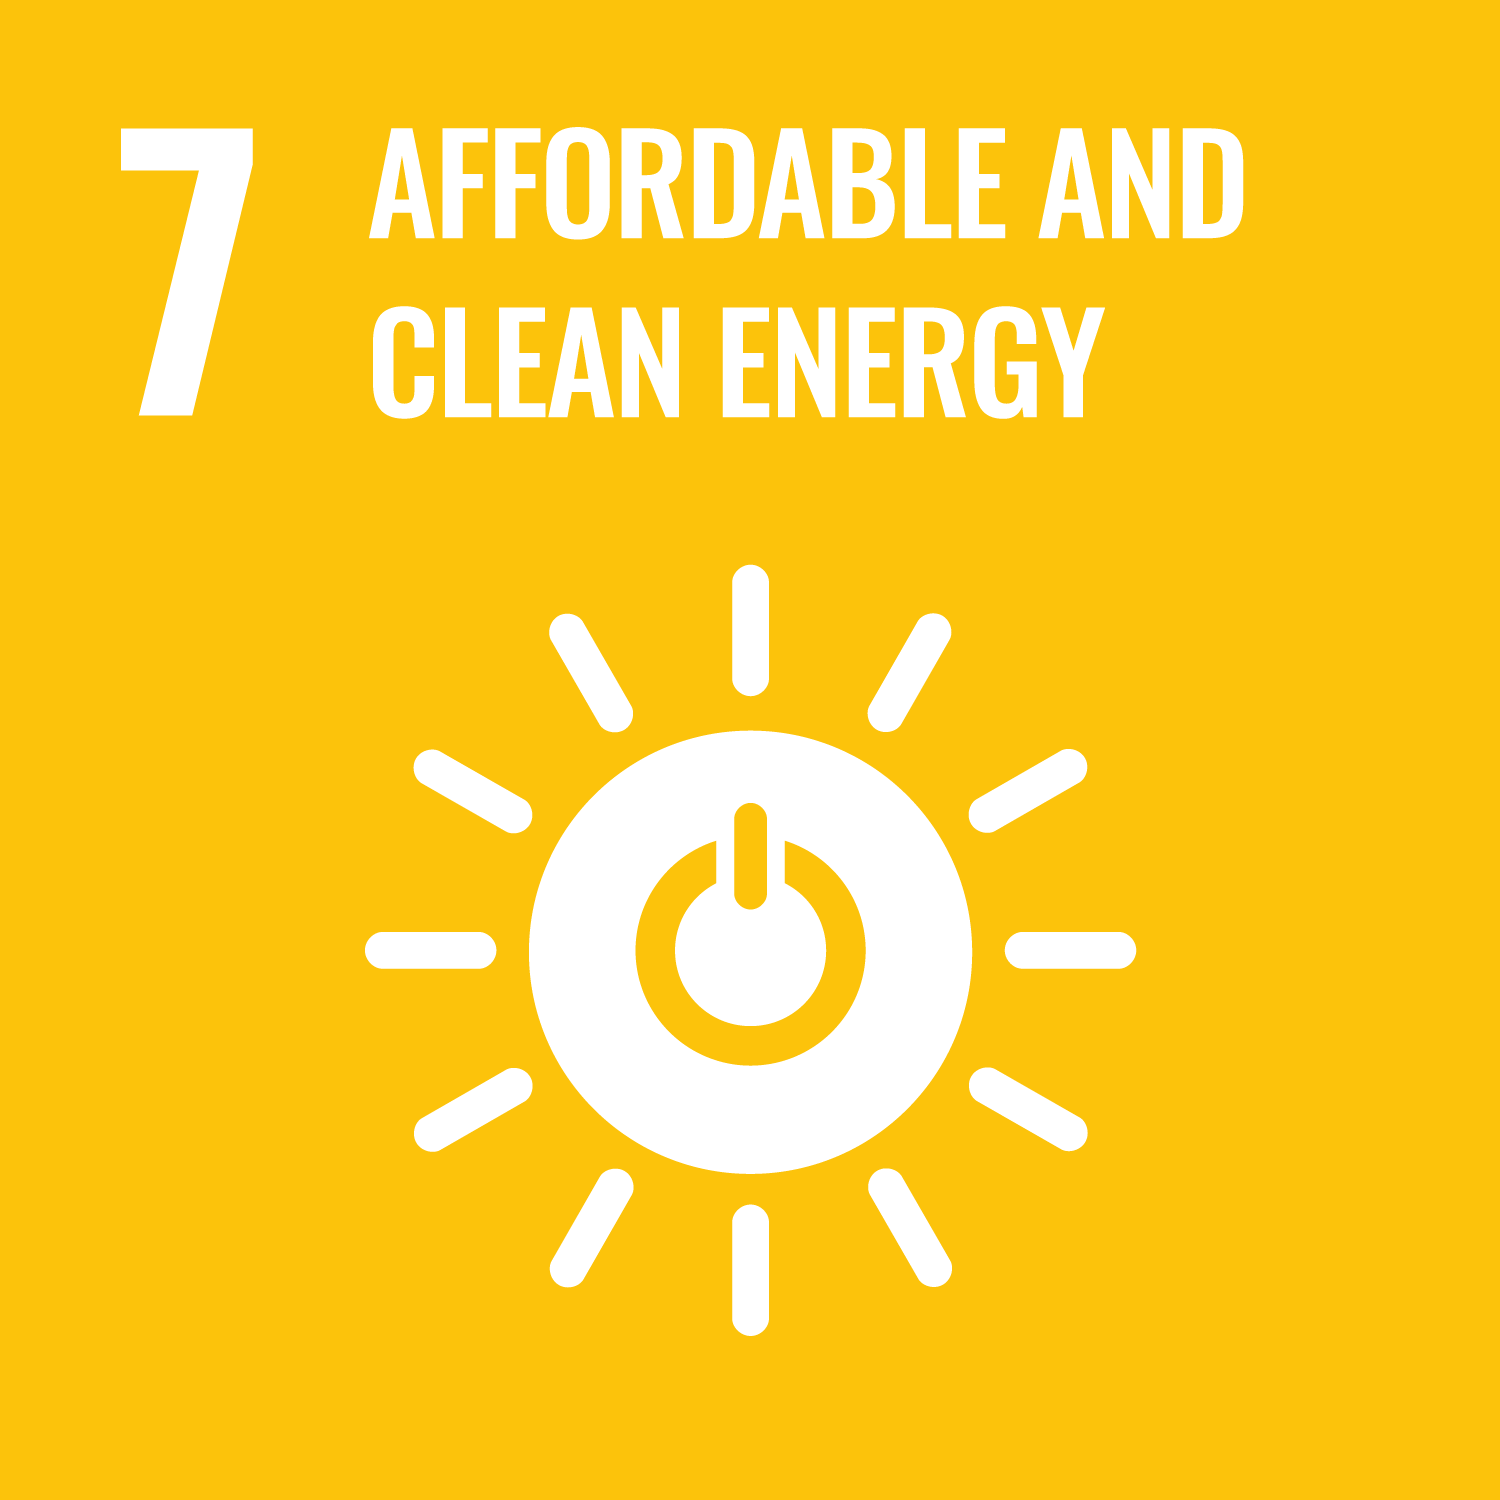 Sustainable Development Goals (SDG7) Affordable and Clean Energy